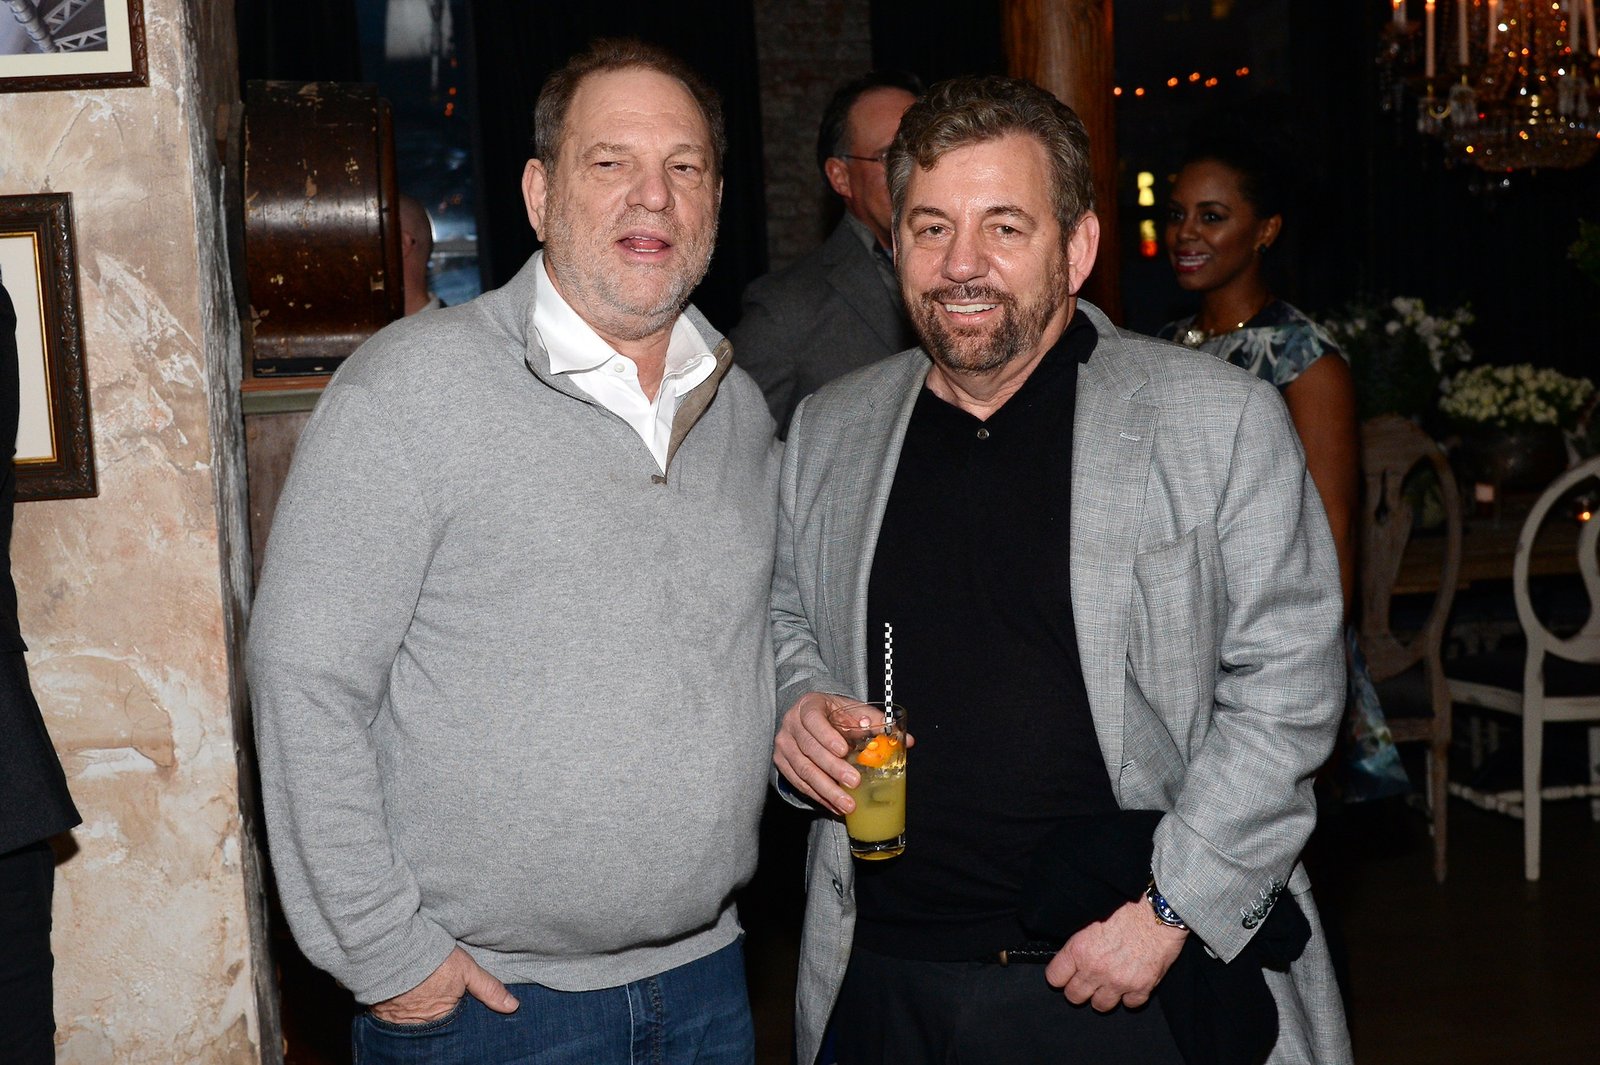 Lawsuit Accuses James Dolan And Harvey Weinstein Of Sexual Assault